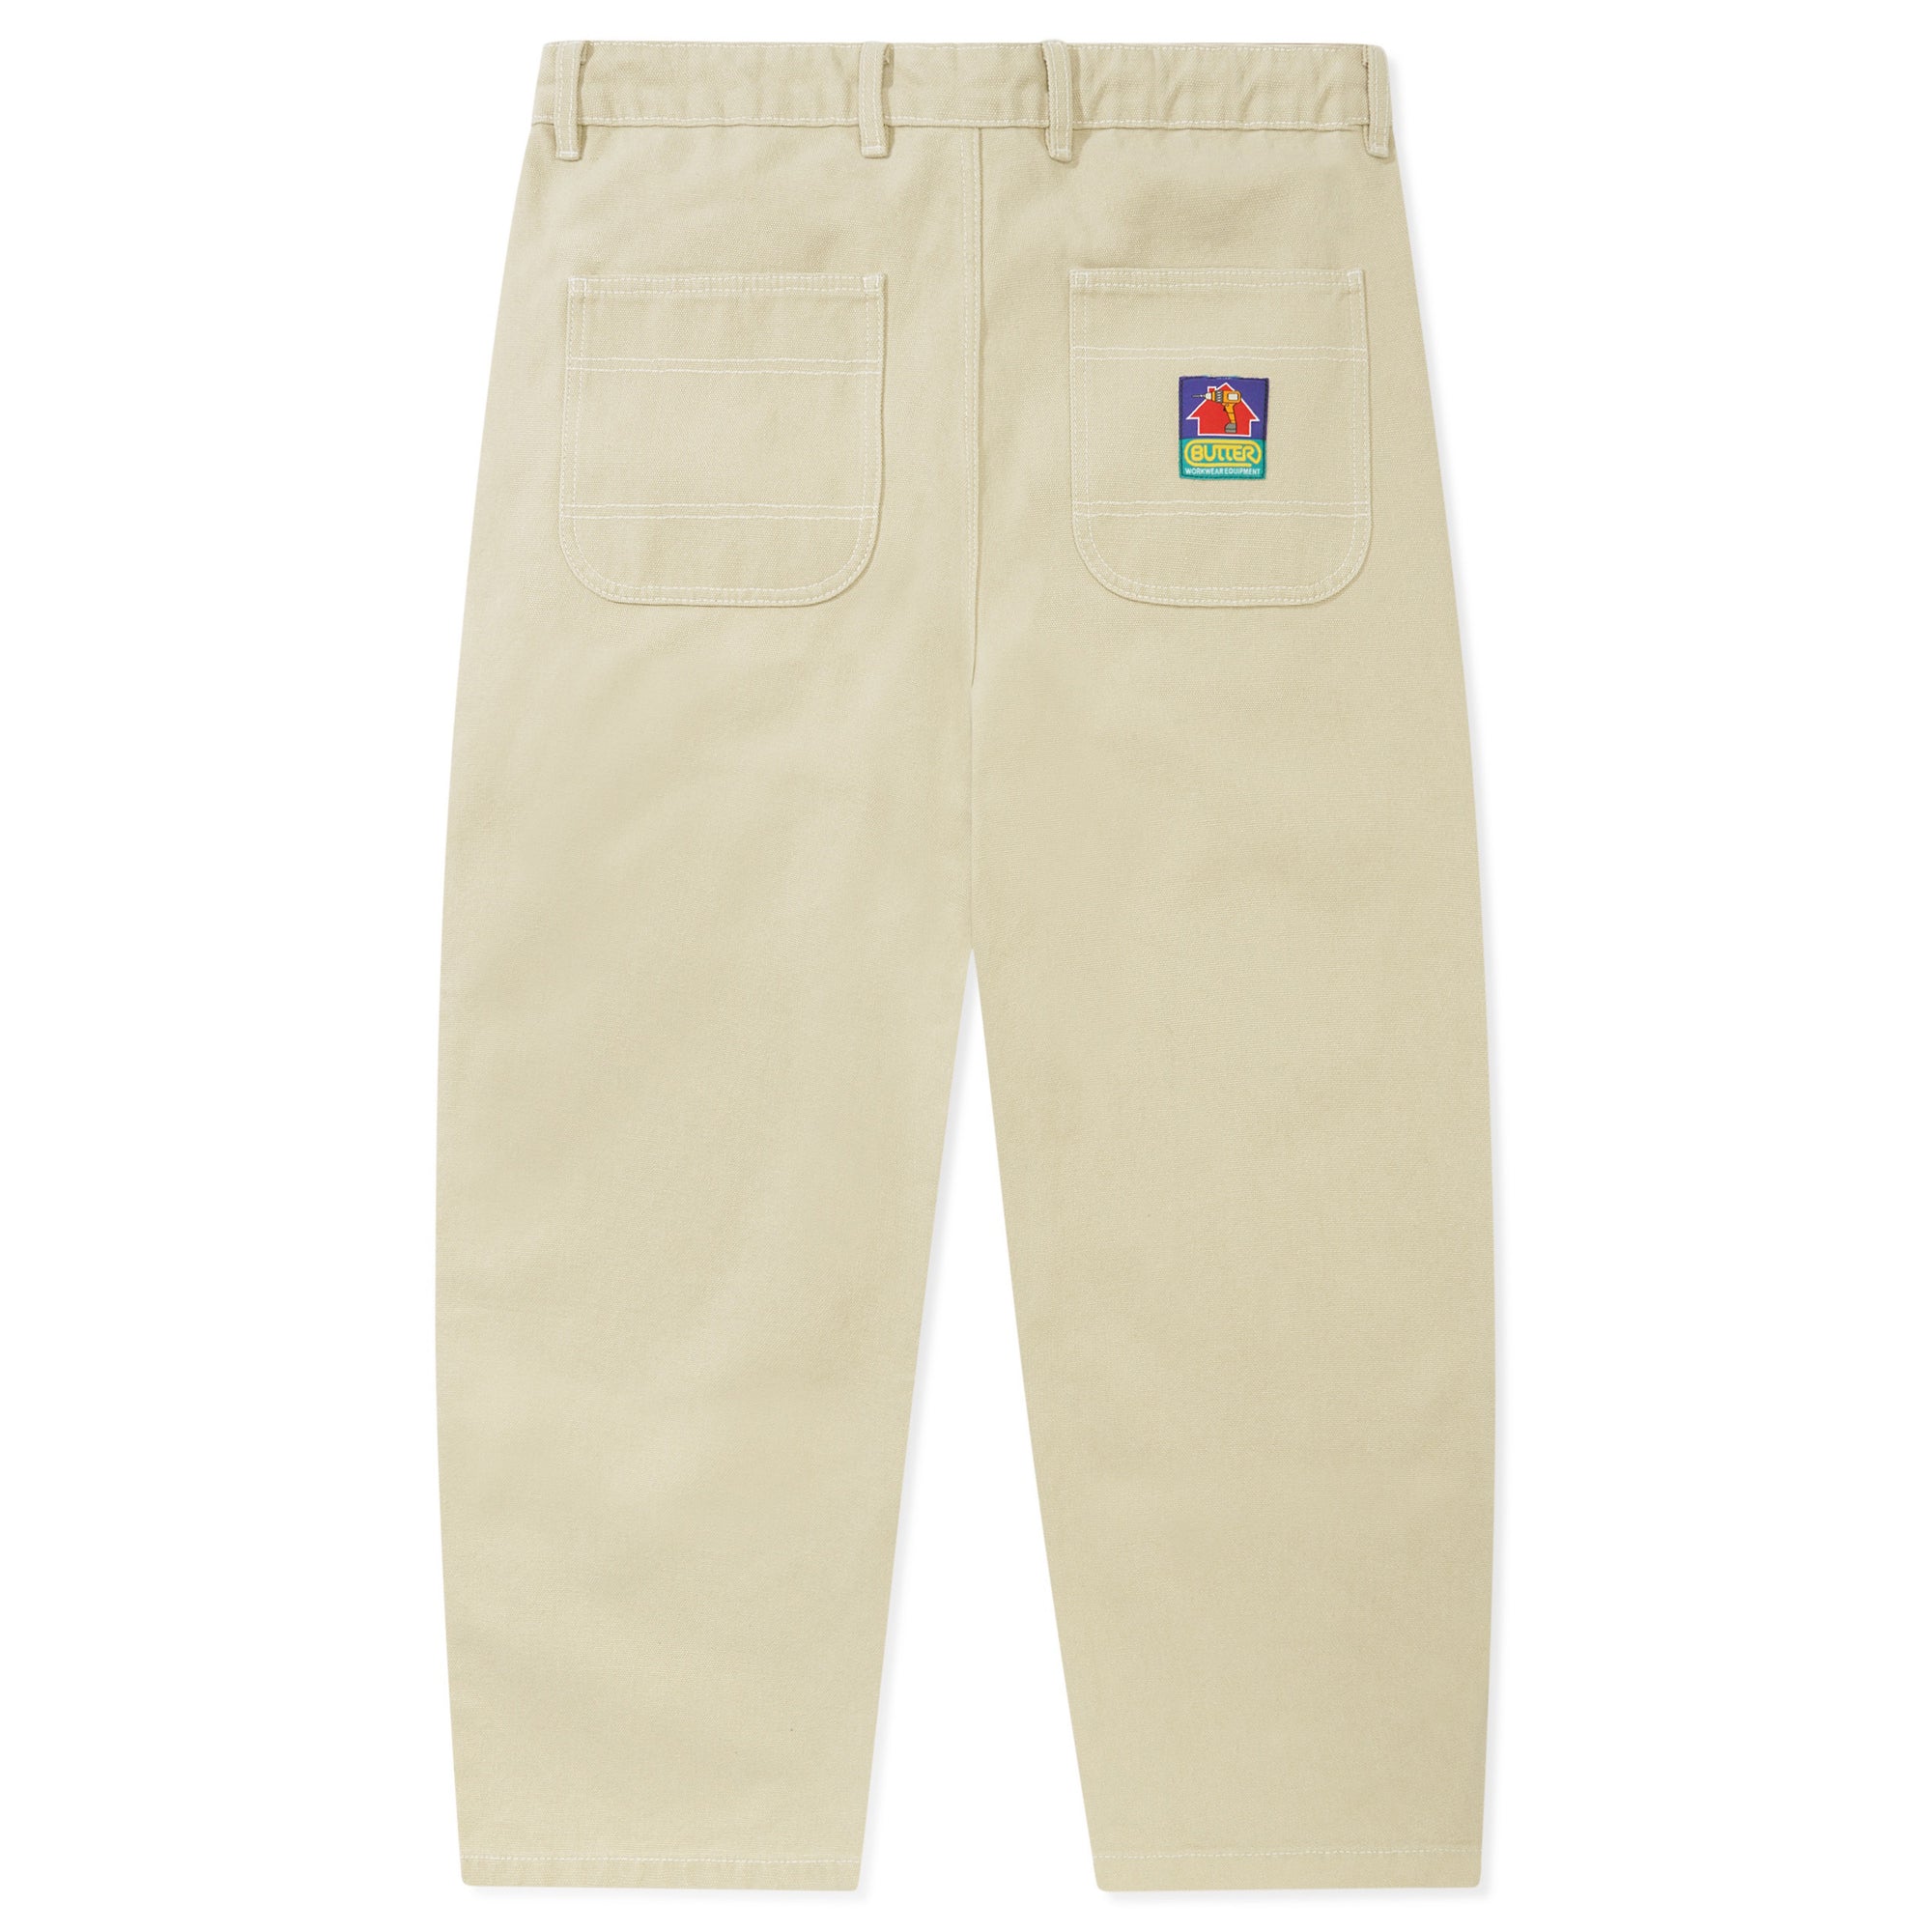 Butter Goods Work Double Knee Pants Washed Khaki